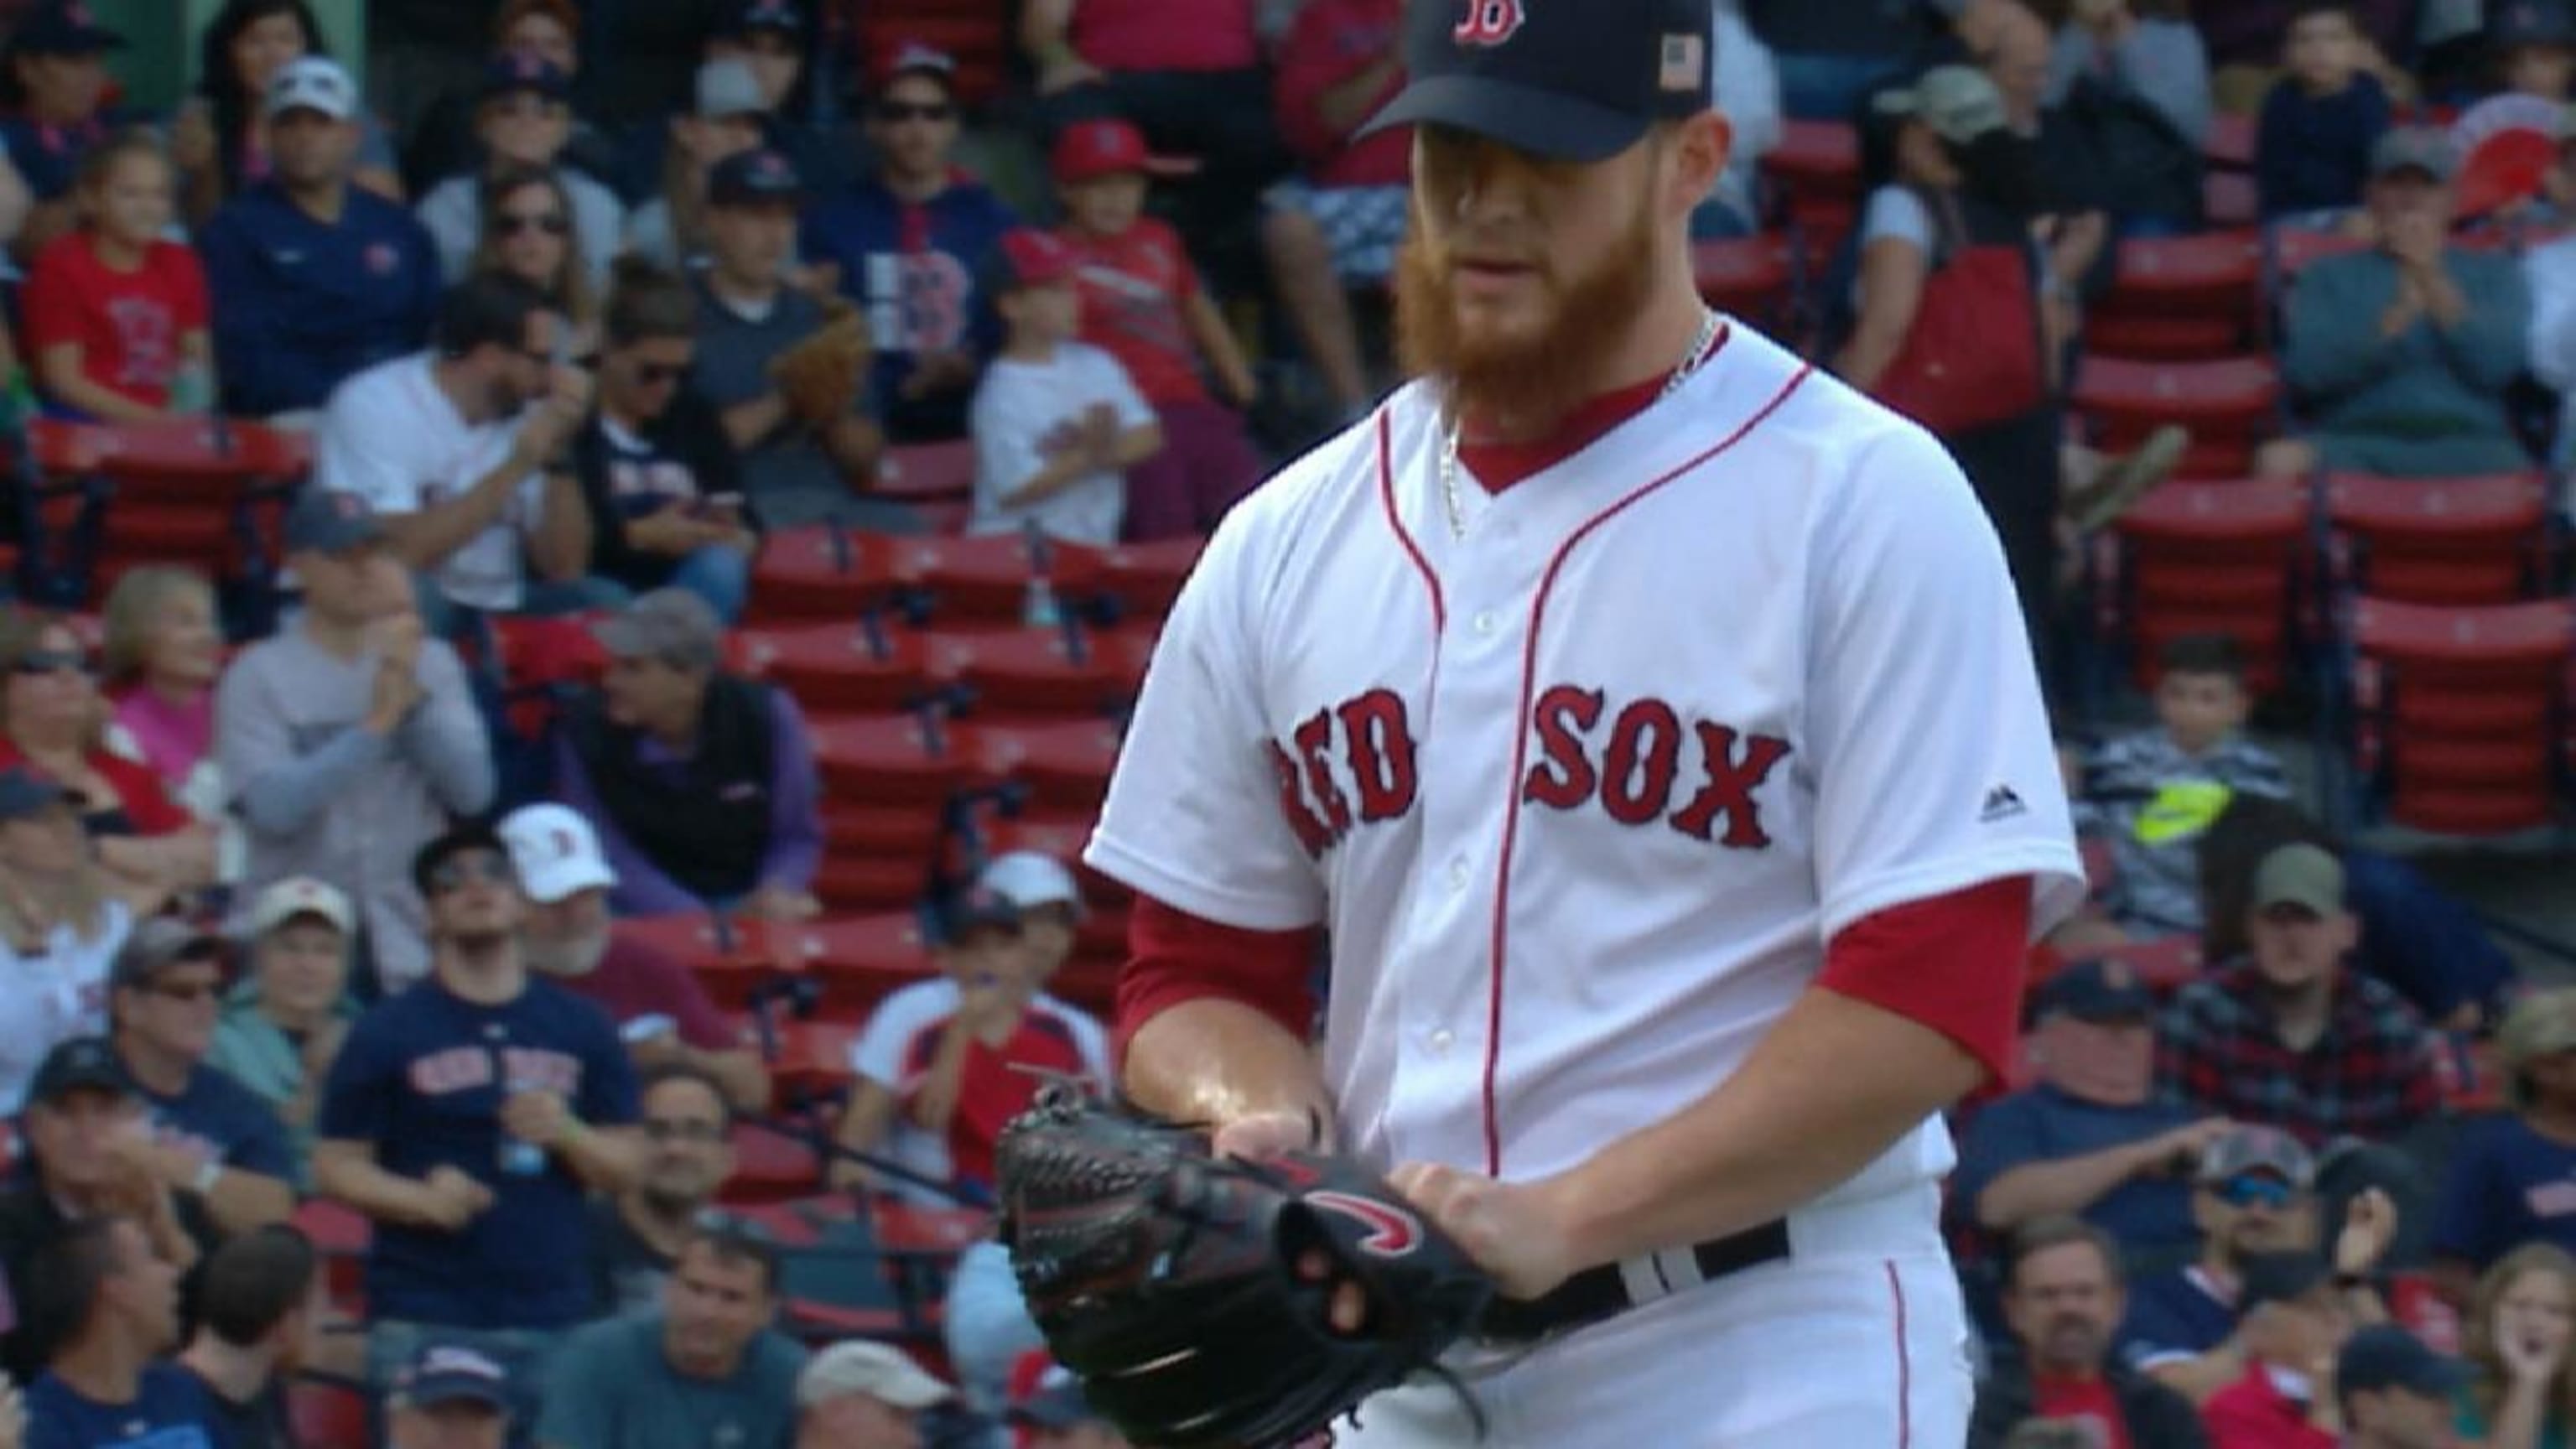 Craig Kimbrel, Boston Red Sox reliever, returning to Fort Myers as daughter  Lydia Joy has improved after surgery 